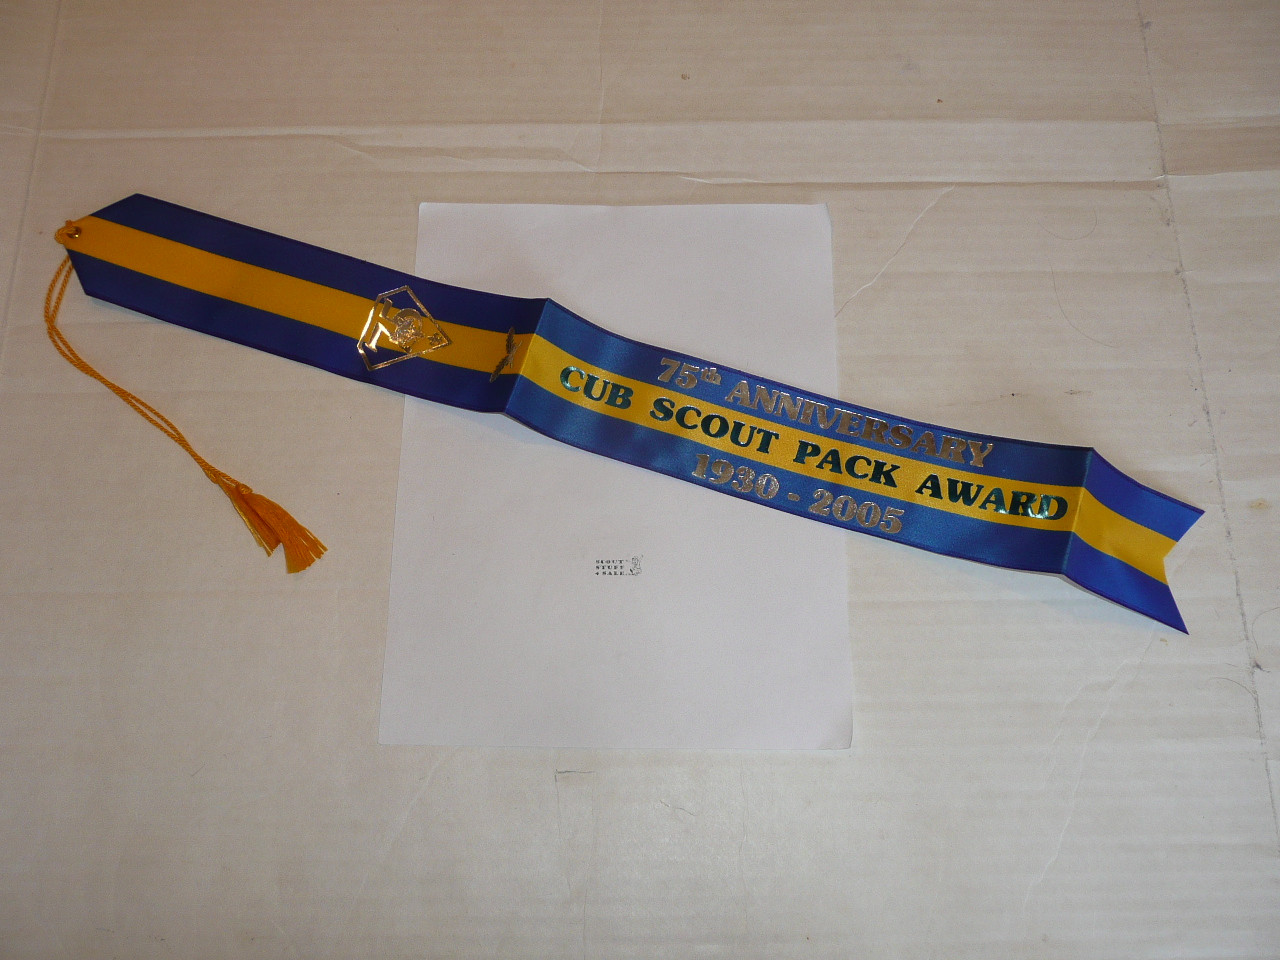 MINT 2005 Cub Scout 75th Anniversary Pack Award Ribbon - Scout